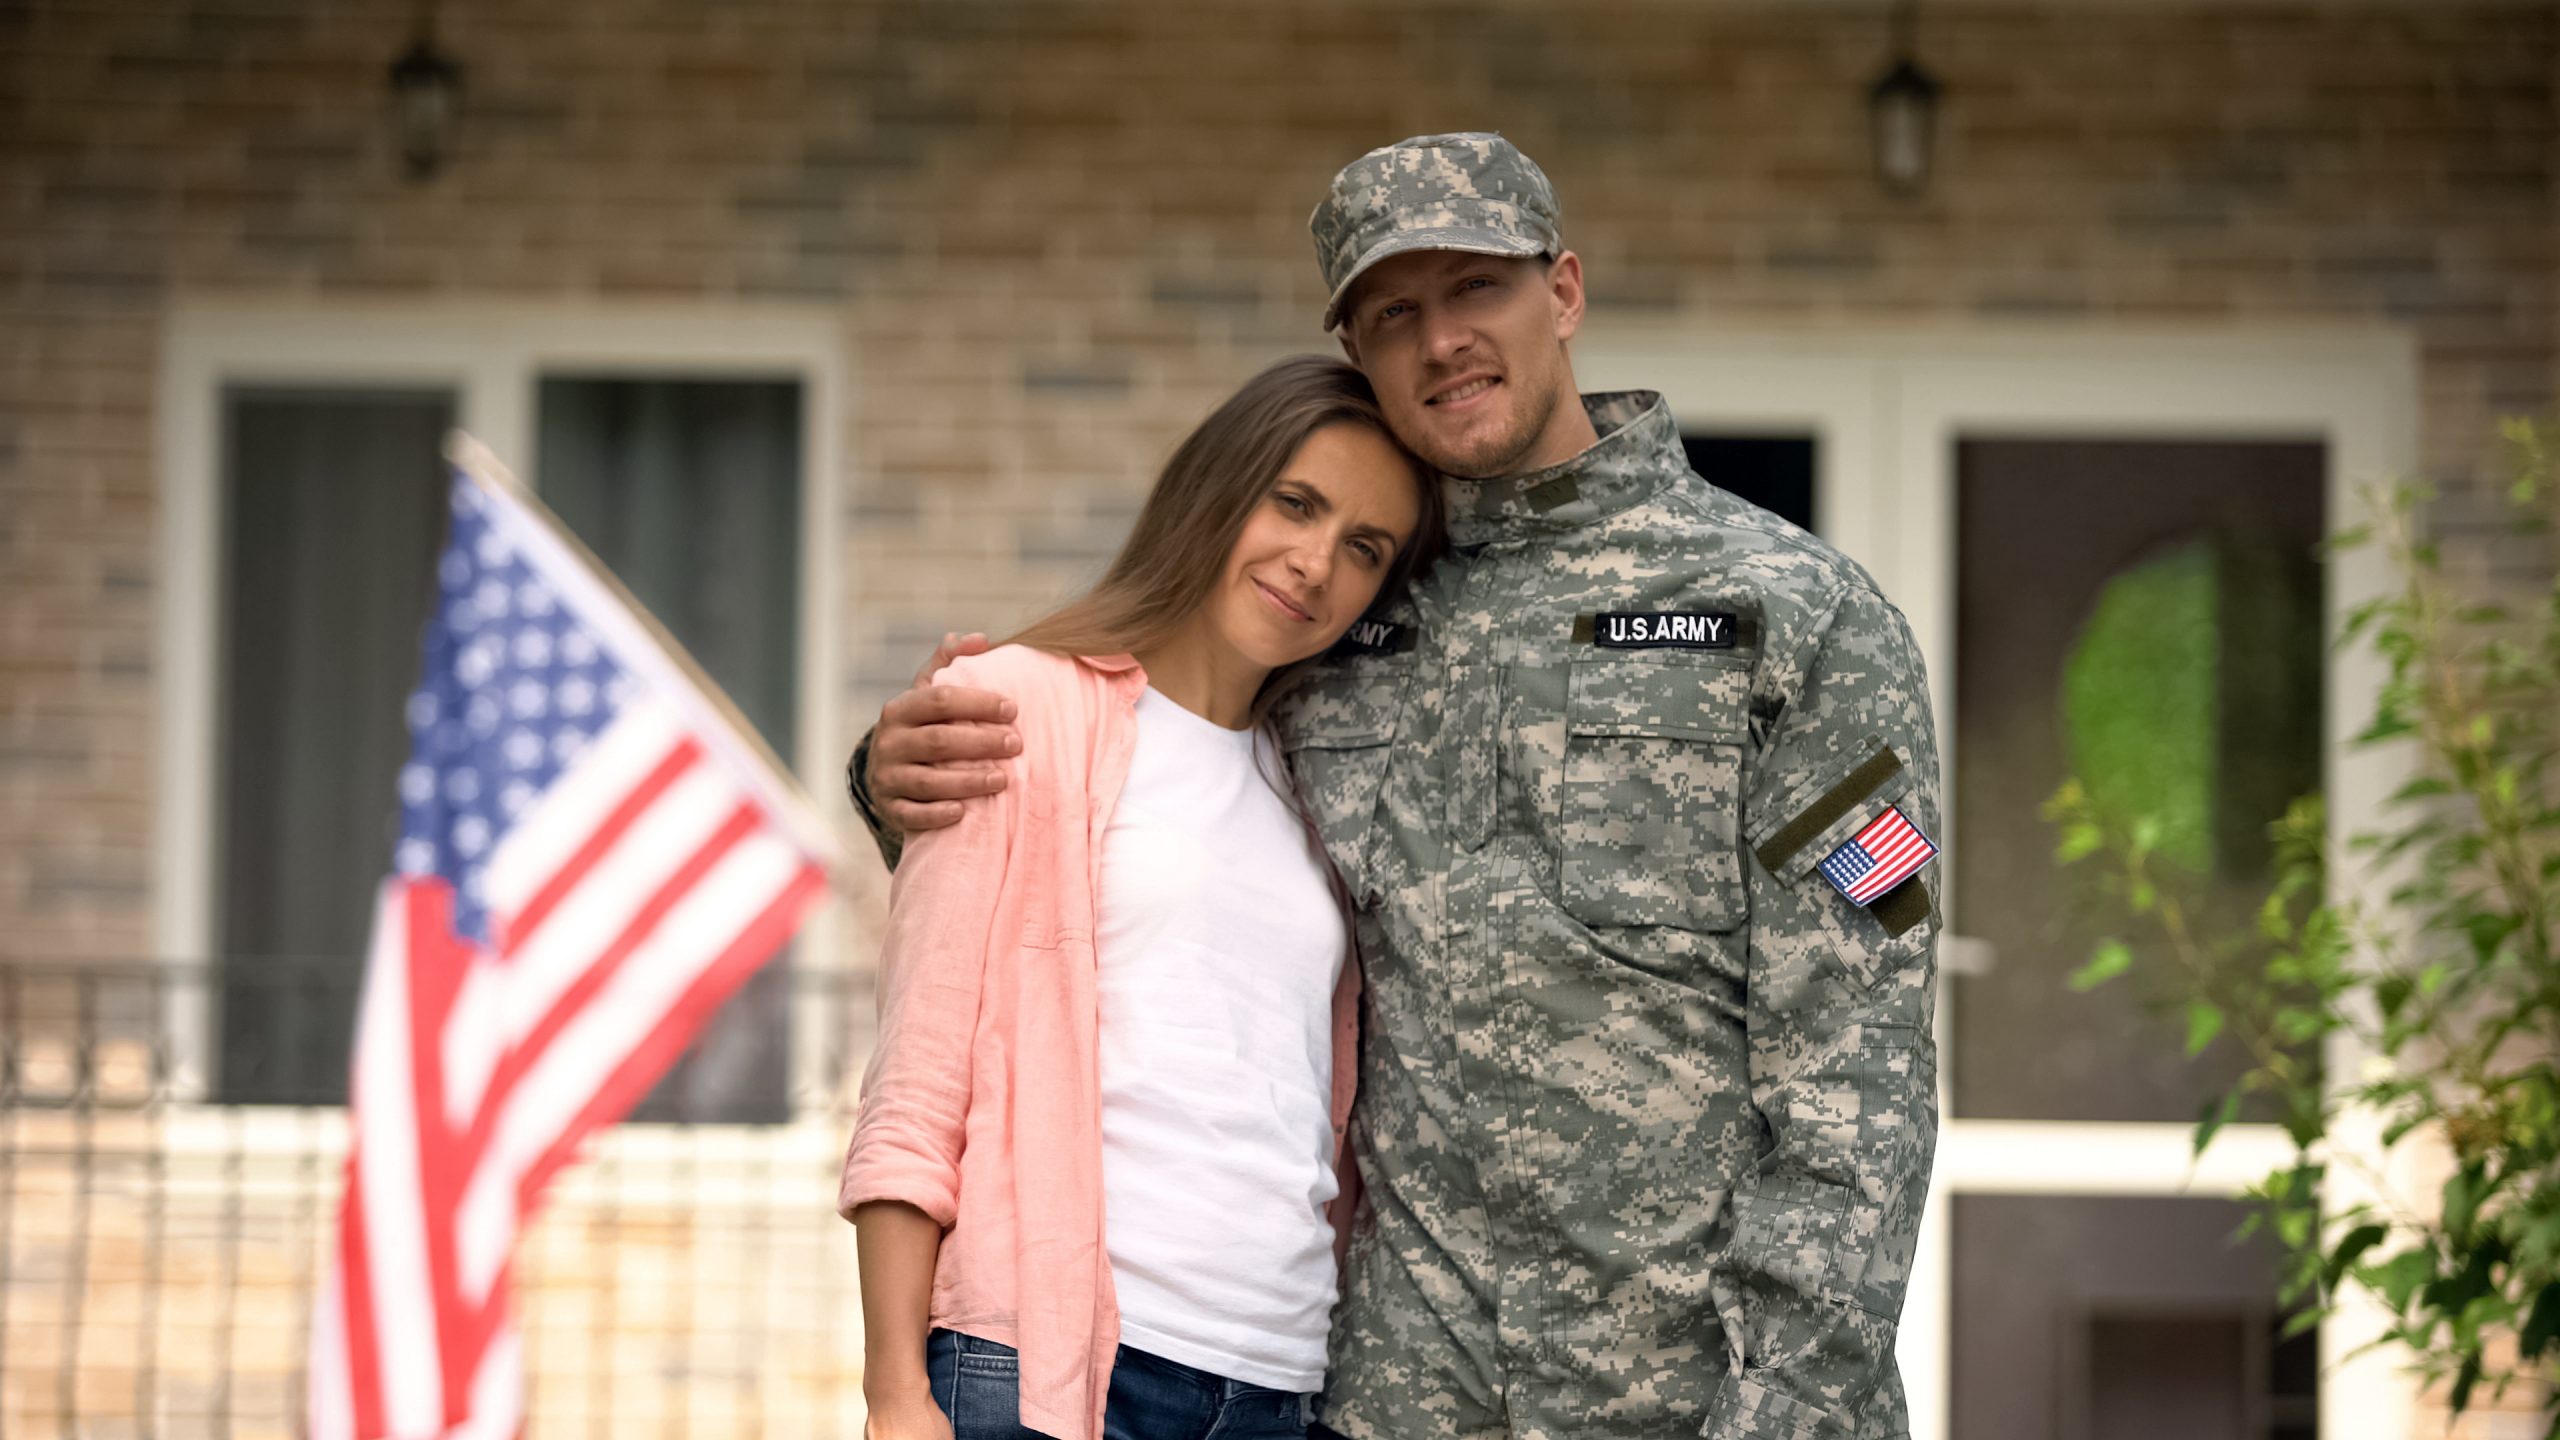 A man in an army uniform hugging his wife in front of a house with an American flag.